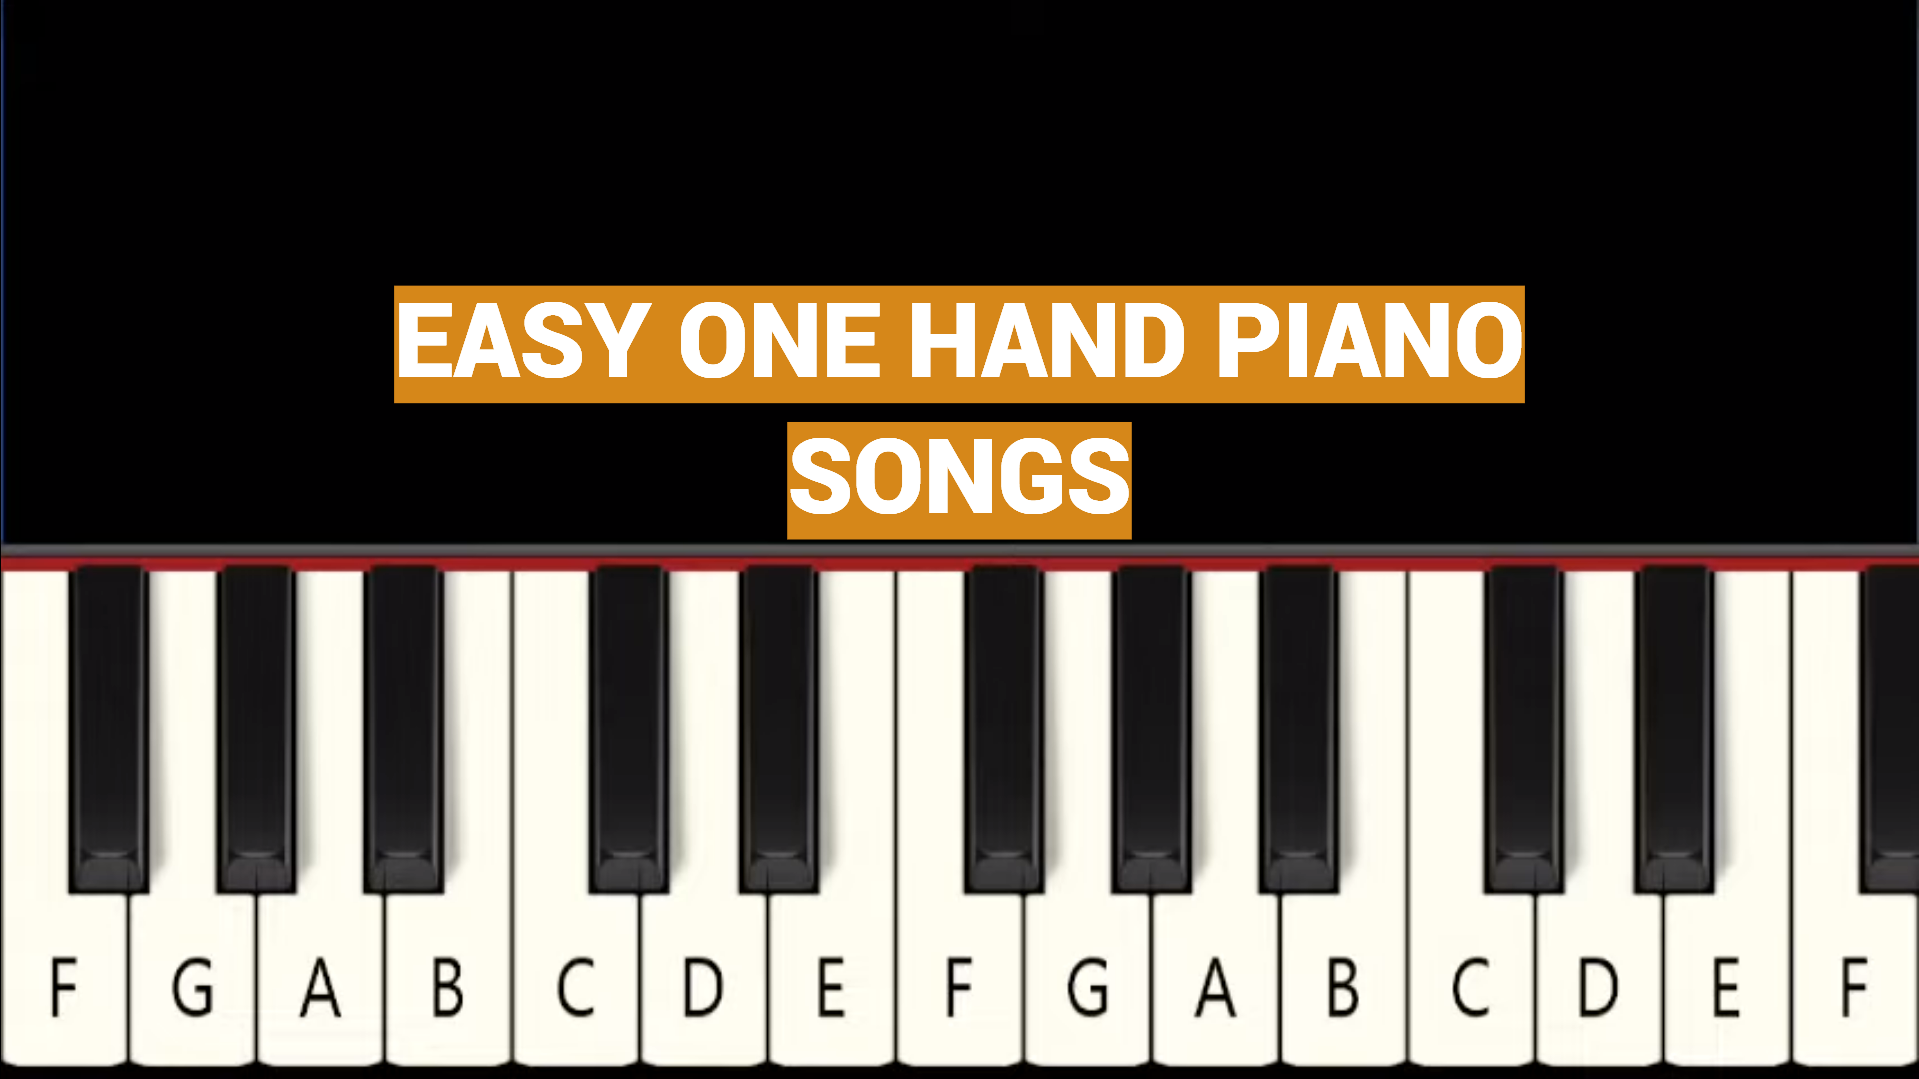 Easy One Hand Piano Songs